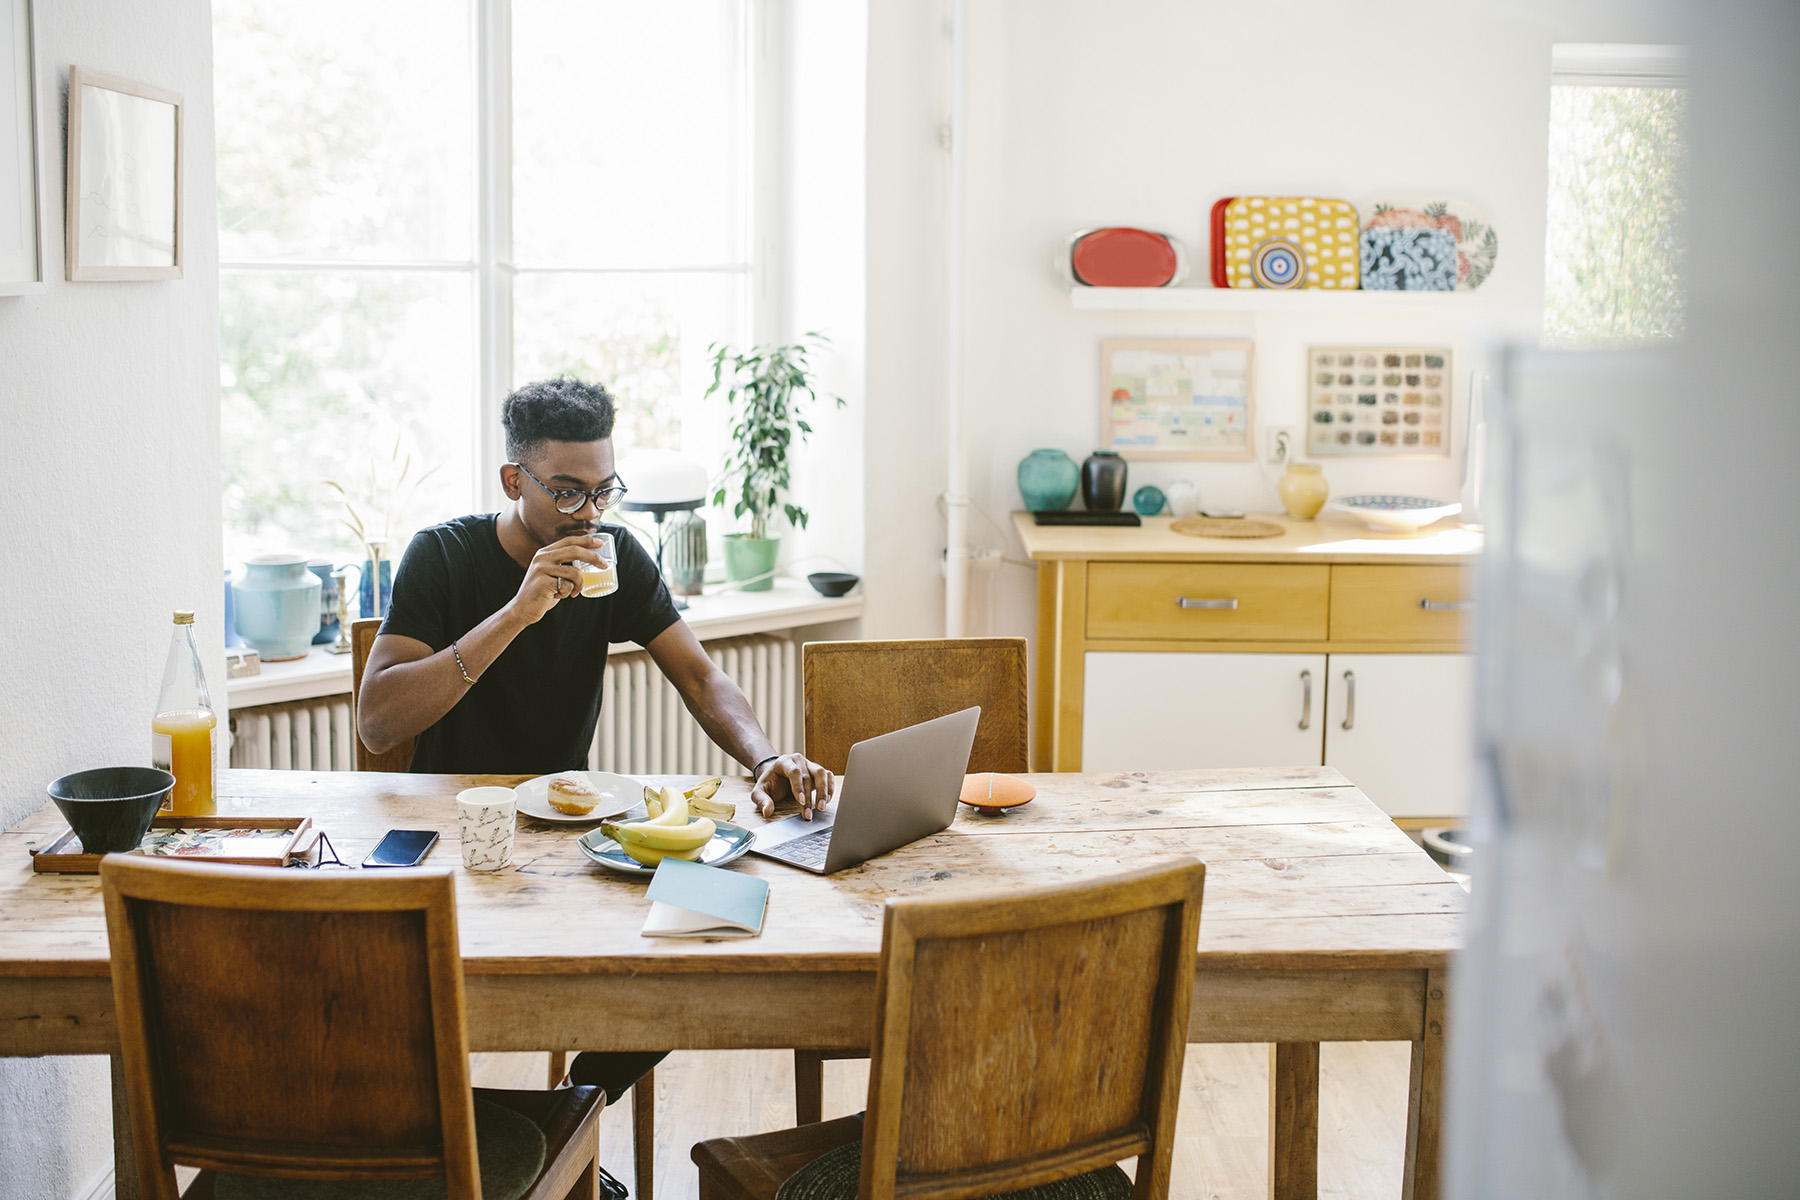 Man eating breakfast and drinking juice while he is working on a laptop at the kitchen table.